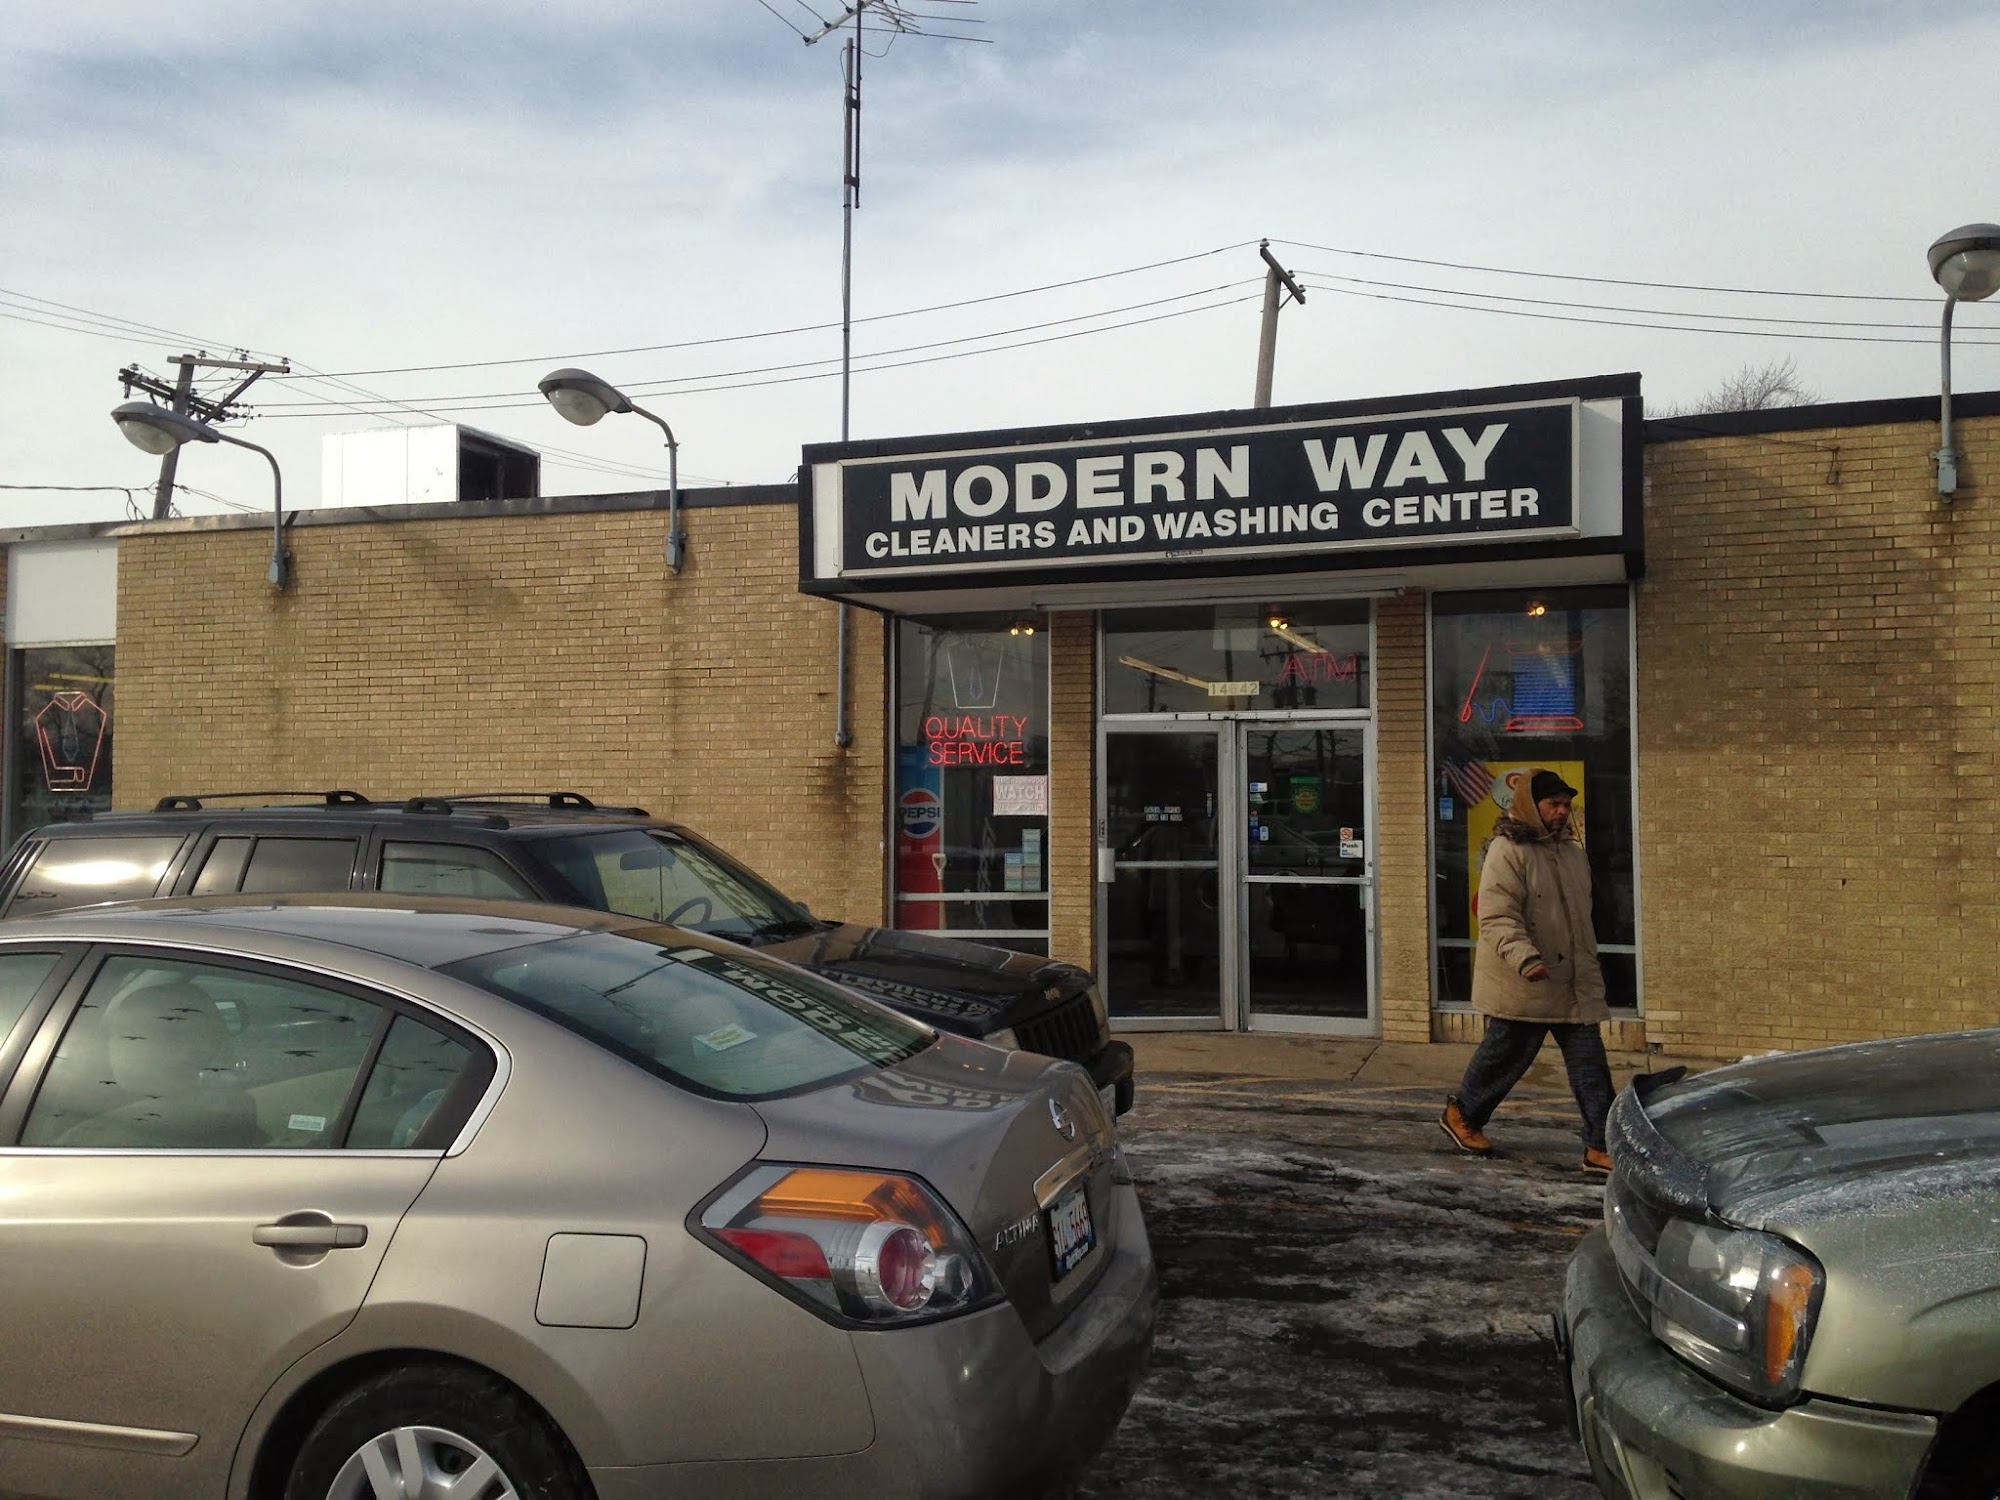 Modern Way Dry Cleaning & Wash